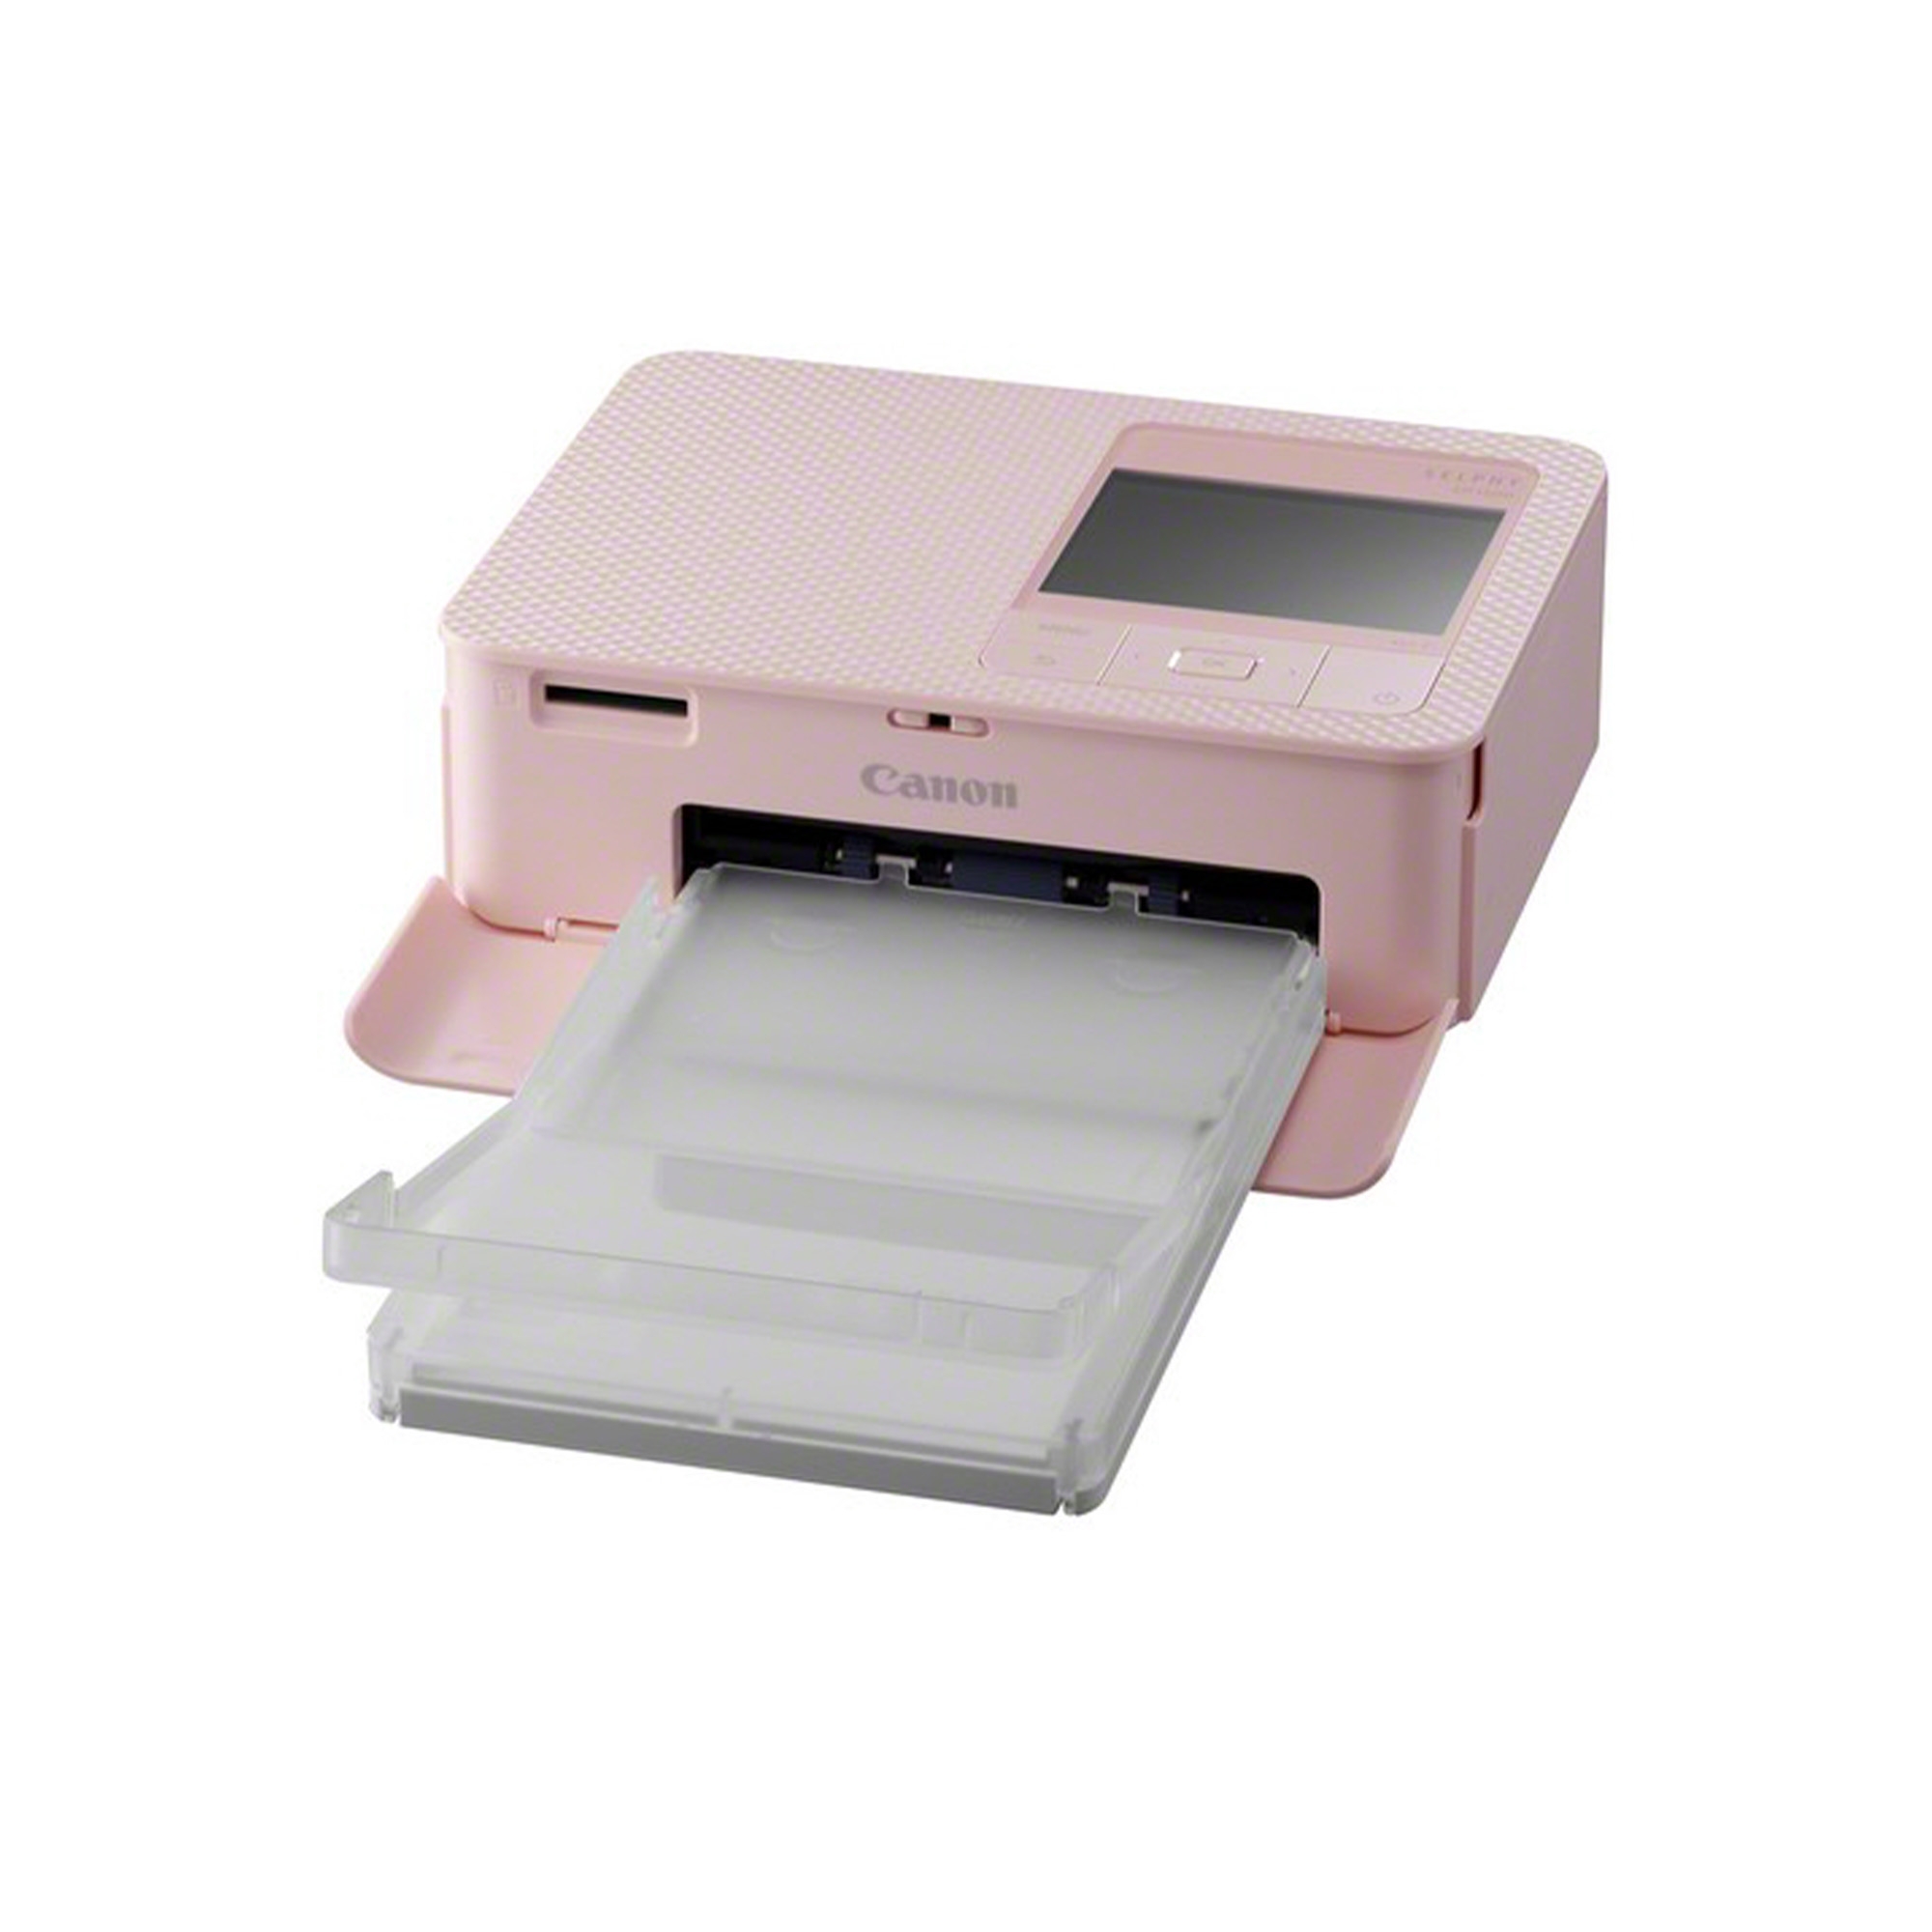 Canon Selphy Cp1500 Instant Printer Pink Castle Cameras 8546